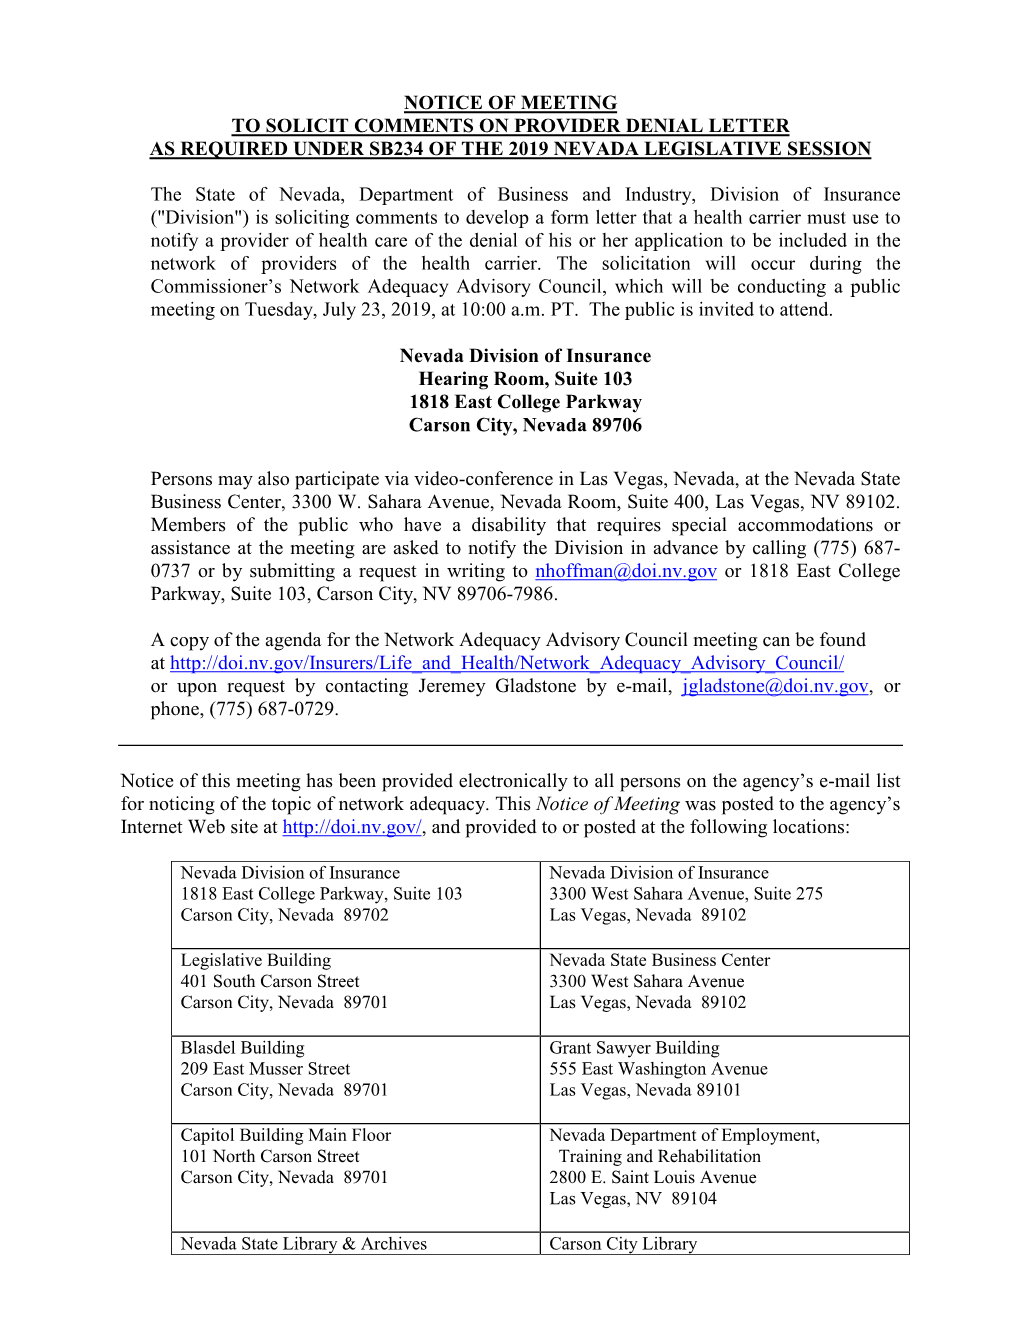 Notice of Meeting to Solicit Comments on Provider Denial Letter As Required Under Sb234 of the 2019 Nevada Legislative Session